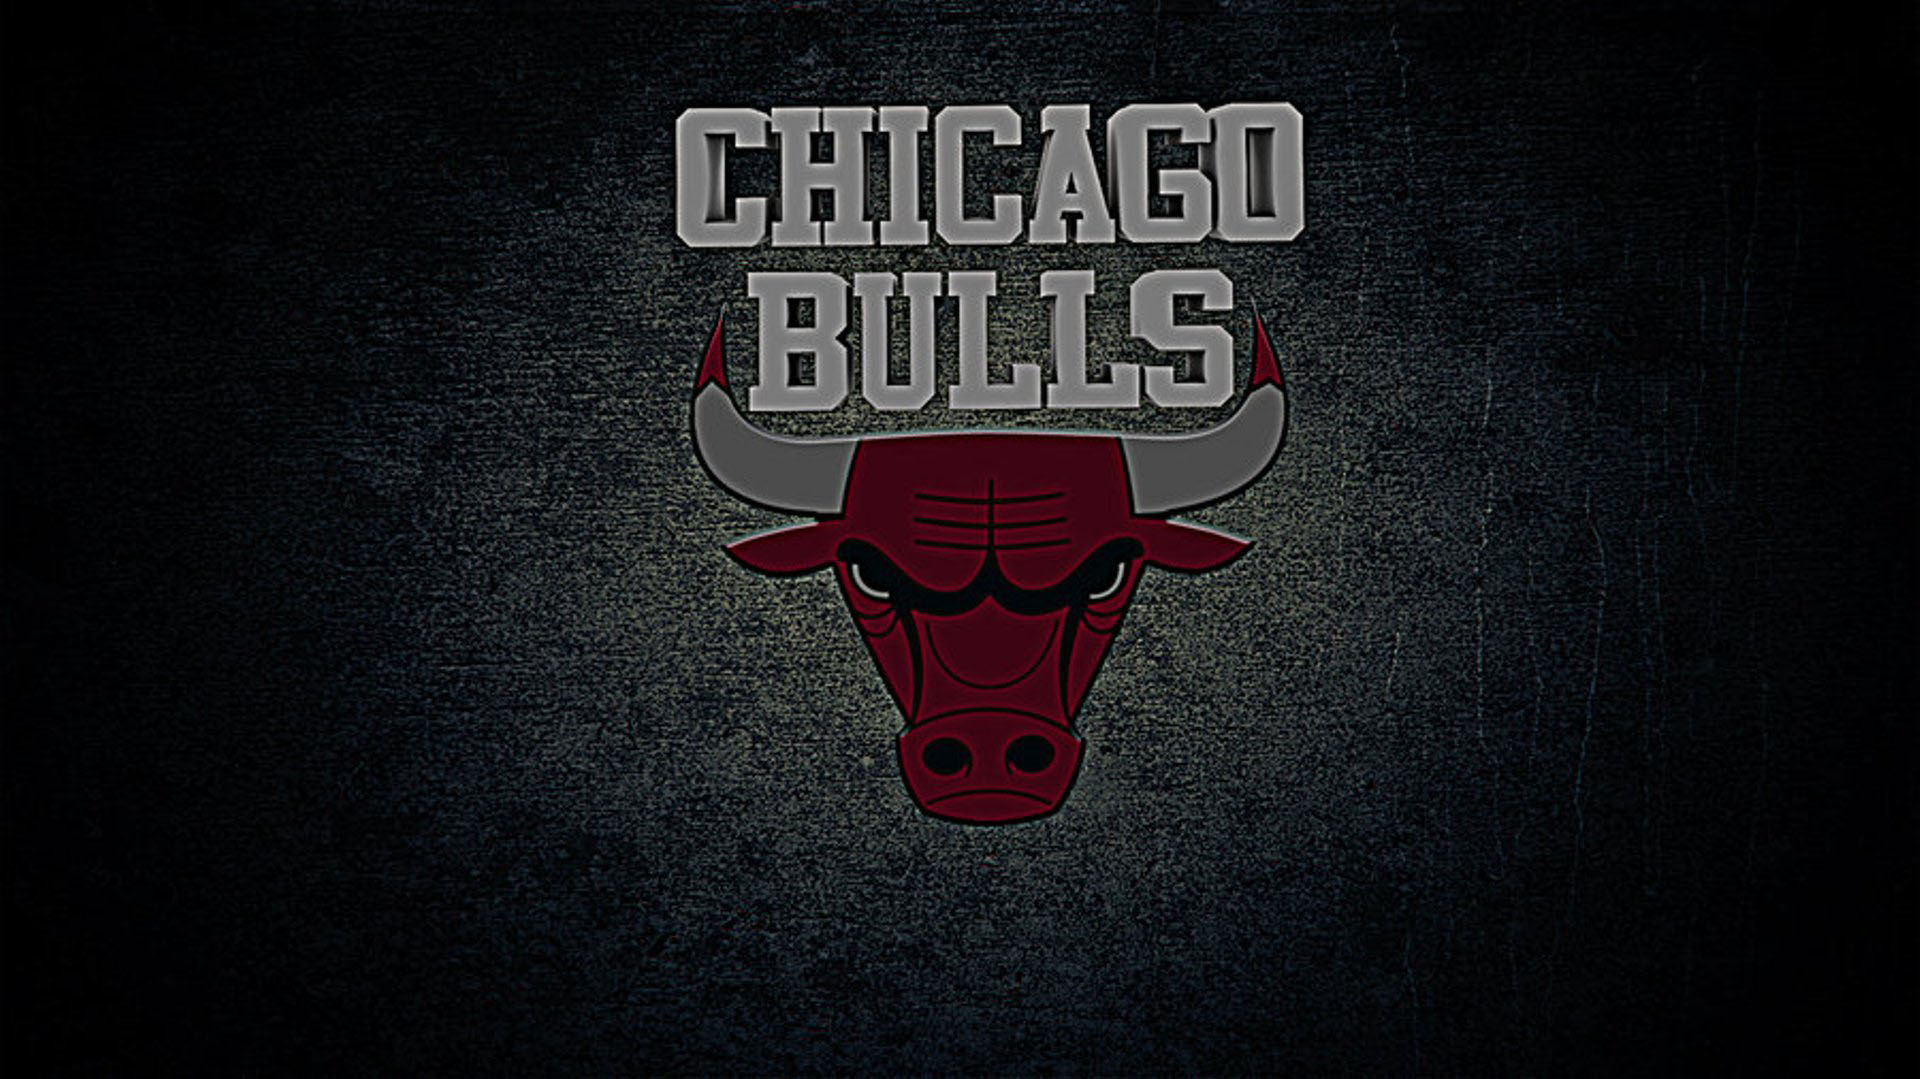 Most famous American basketball team Chicago Bulls